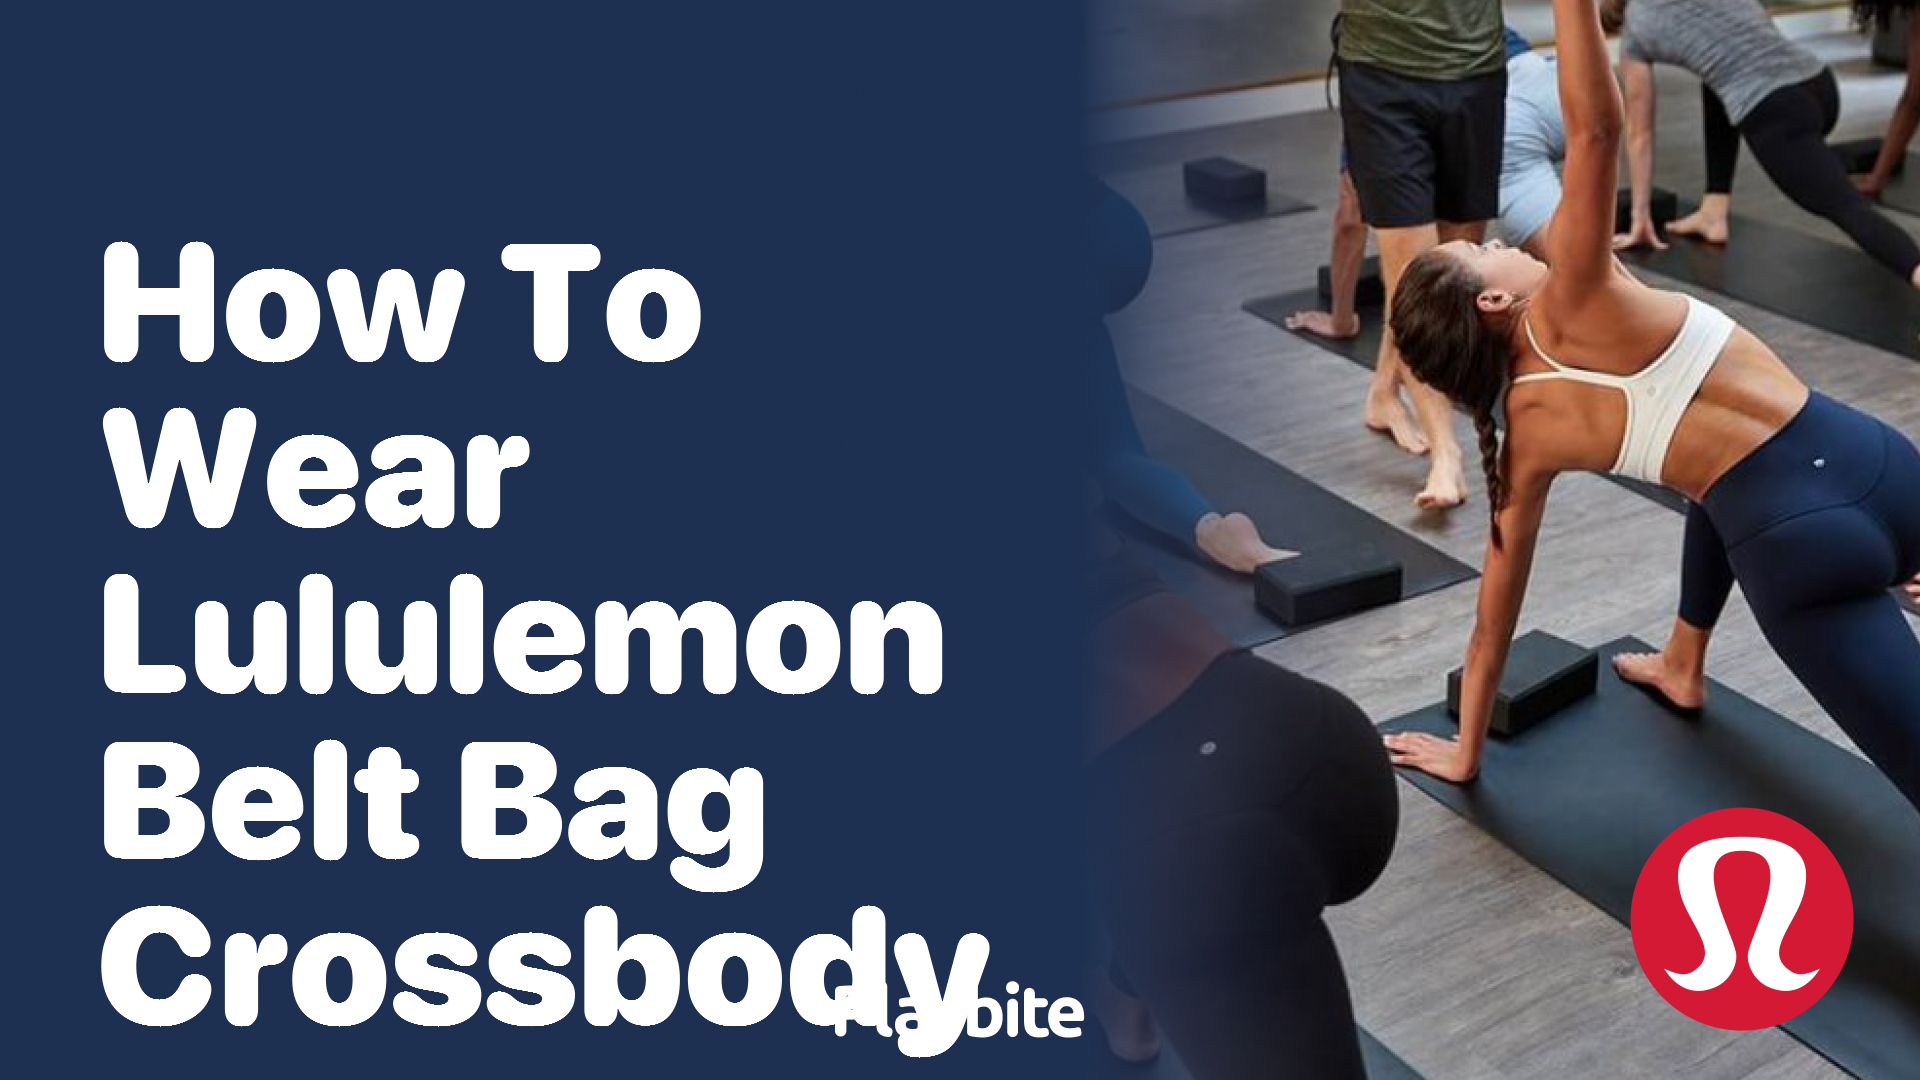 How to Wear a Cross Body Bag from Lululemon - Playbite